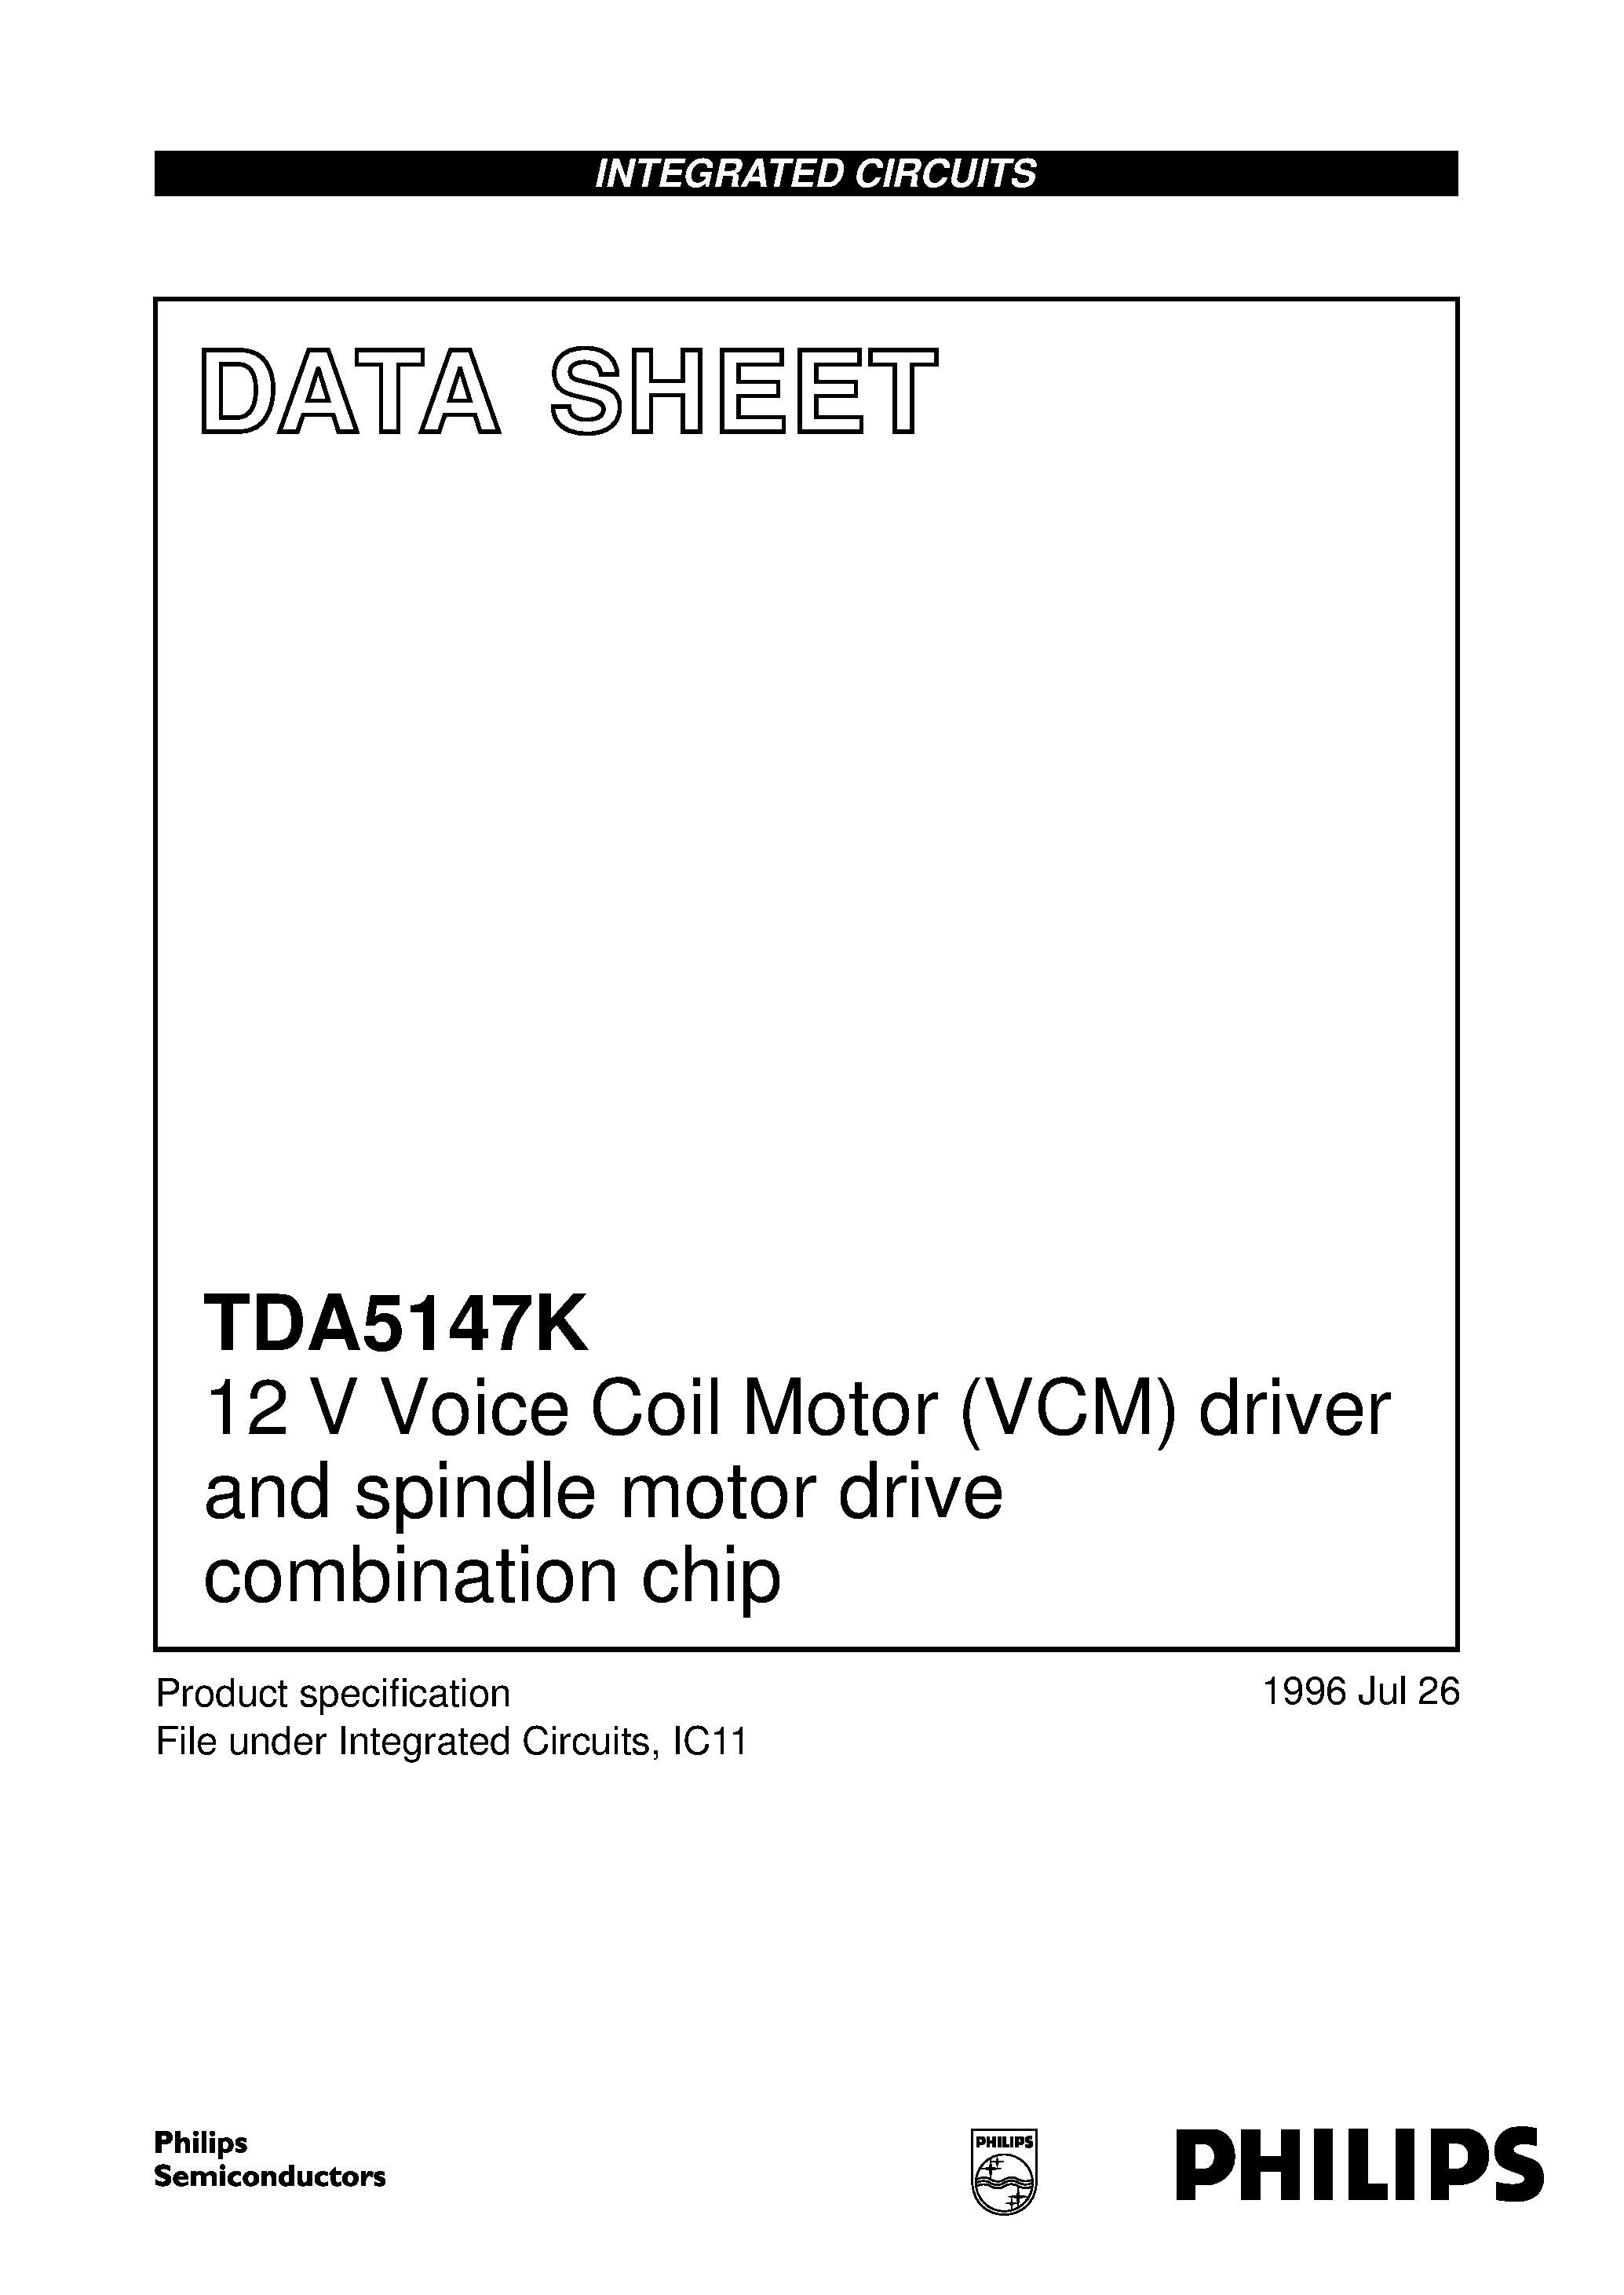 Datasheet TDA5147K - 12 V Voice Coil Motor VCM driver and spindle motor drive combination chip page 1